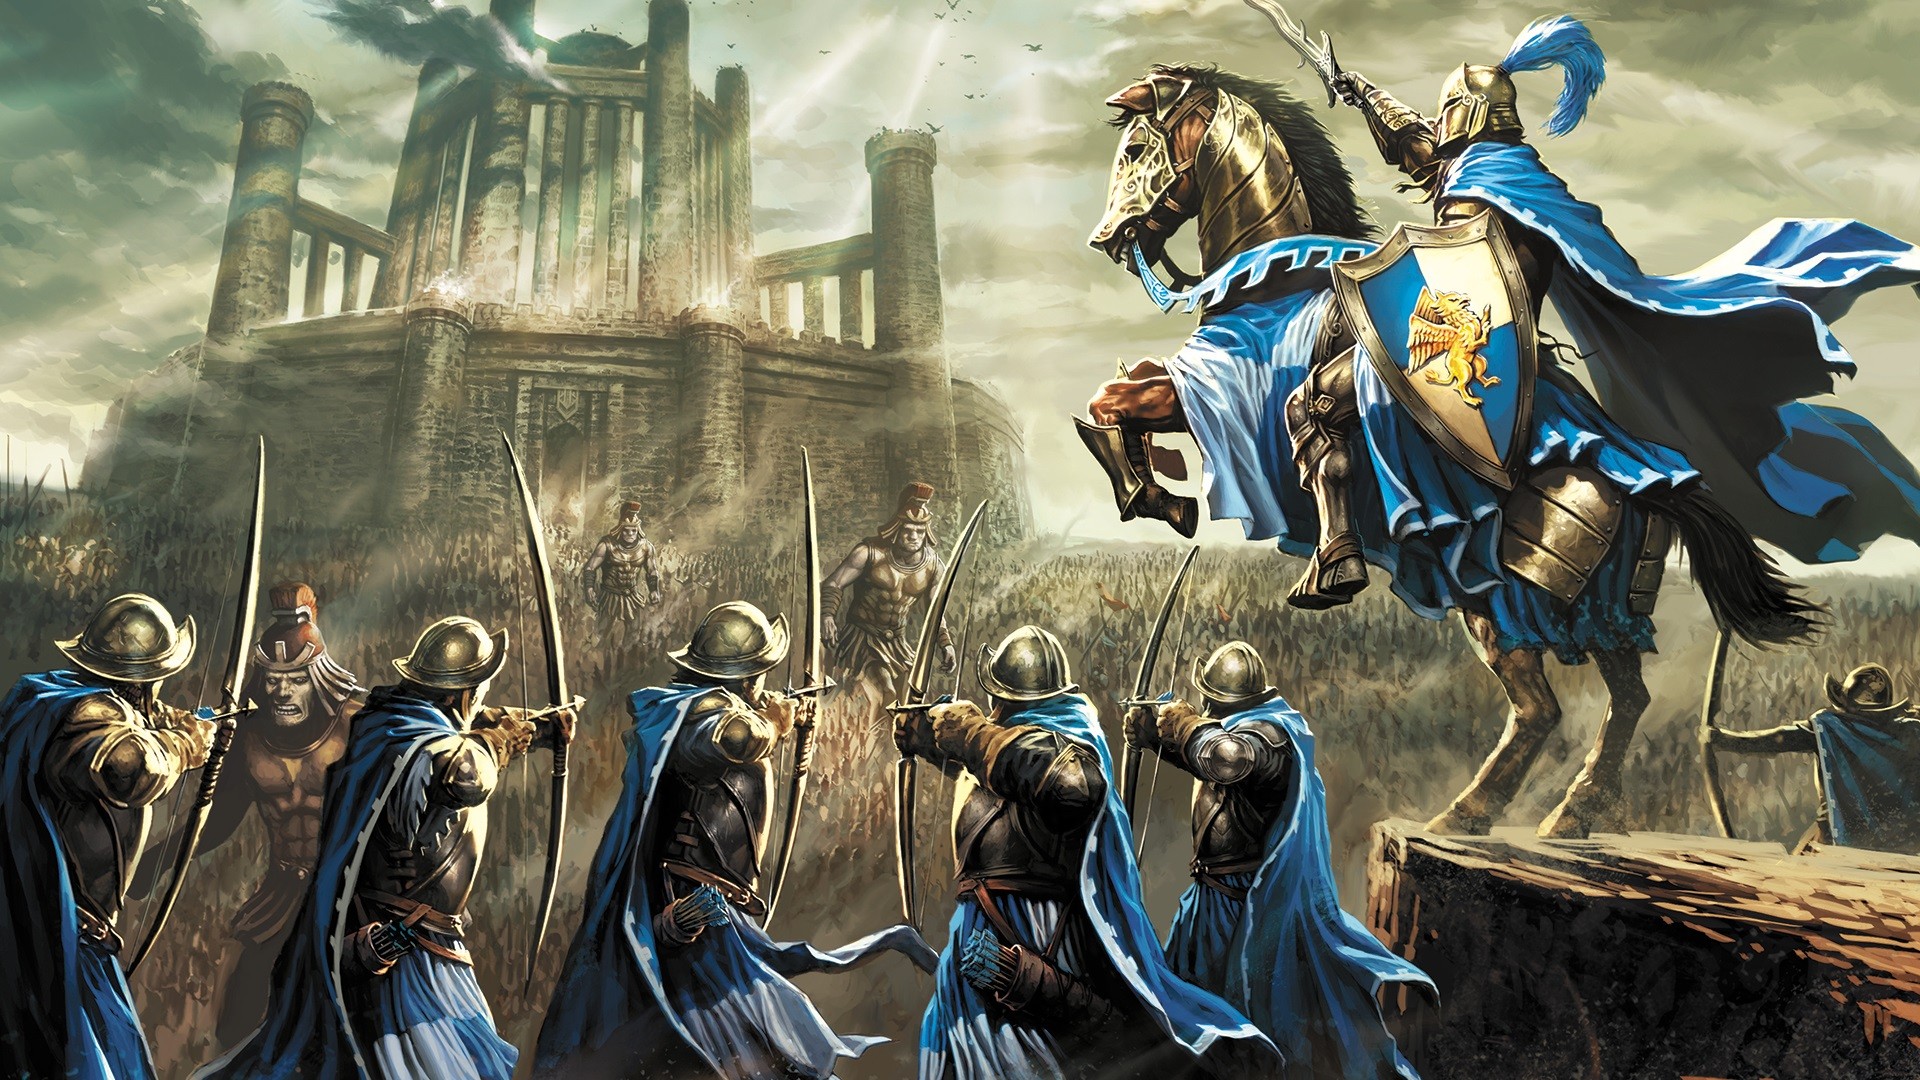 Artwork Fantasy Art Heroes Of Might And Magic Video Games Horse War Archer Knight Castle 1920x1080